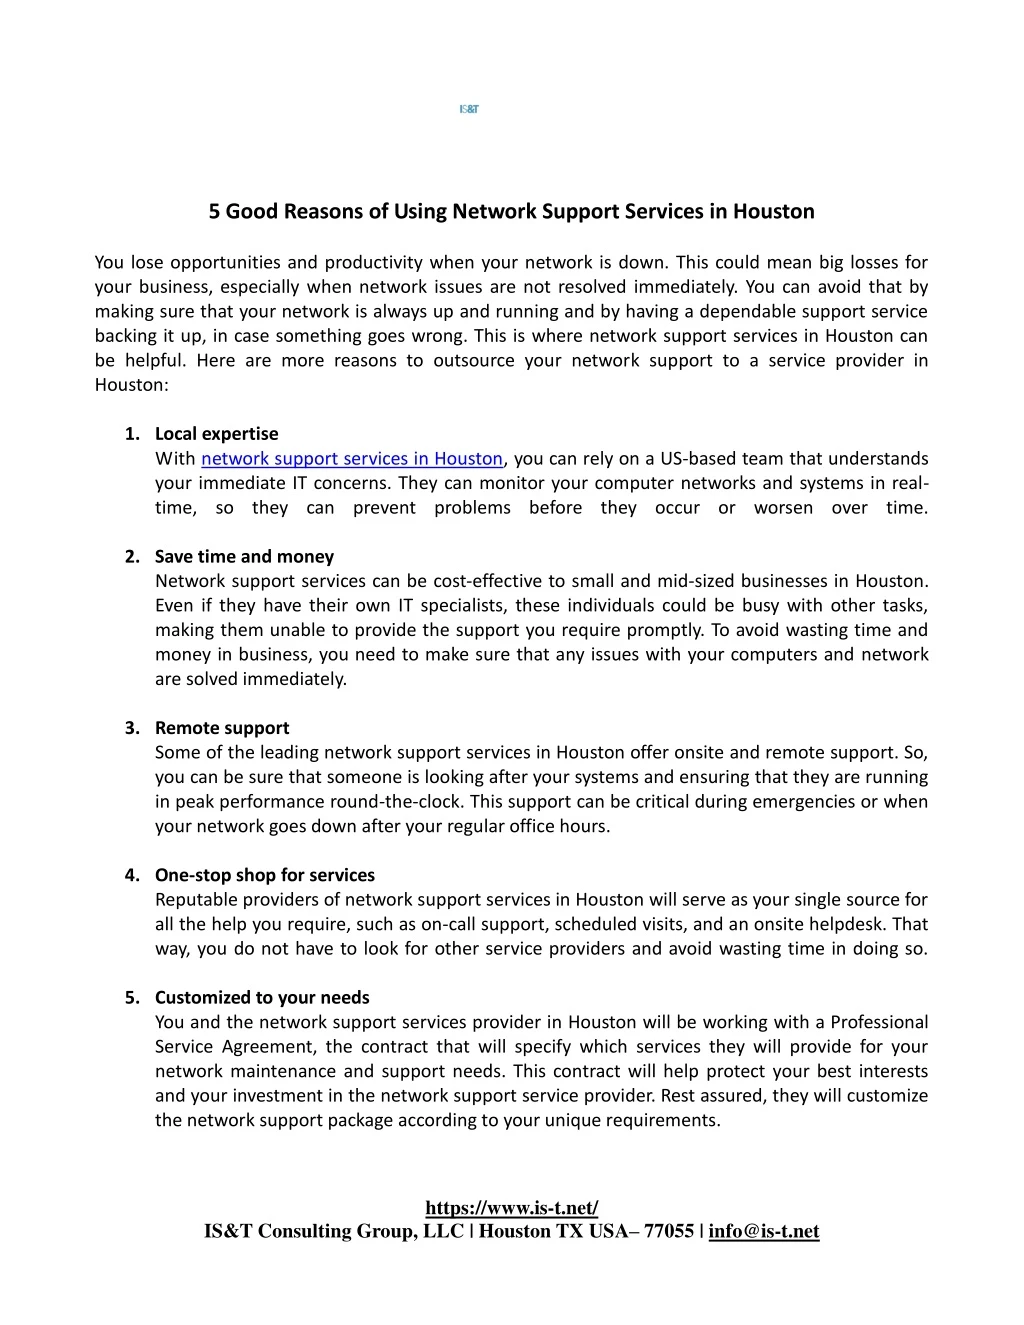 5 good reasons of using network support services